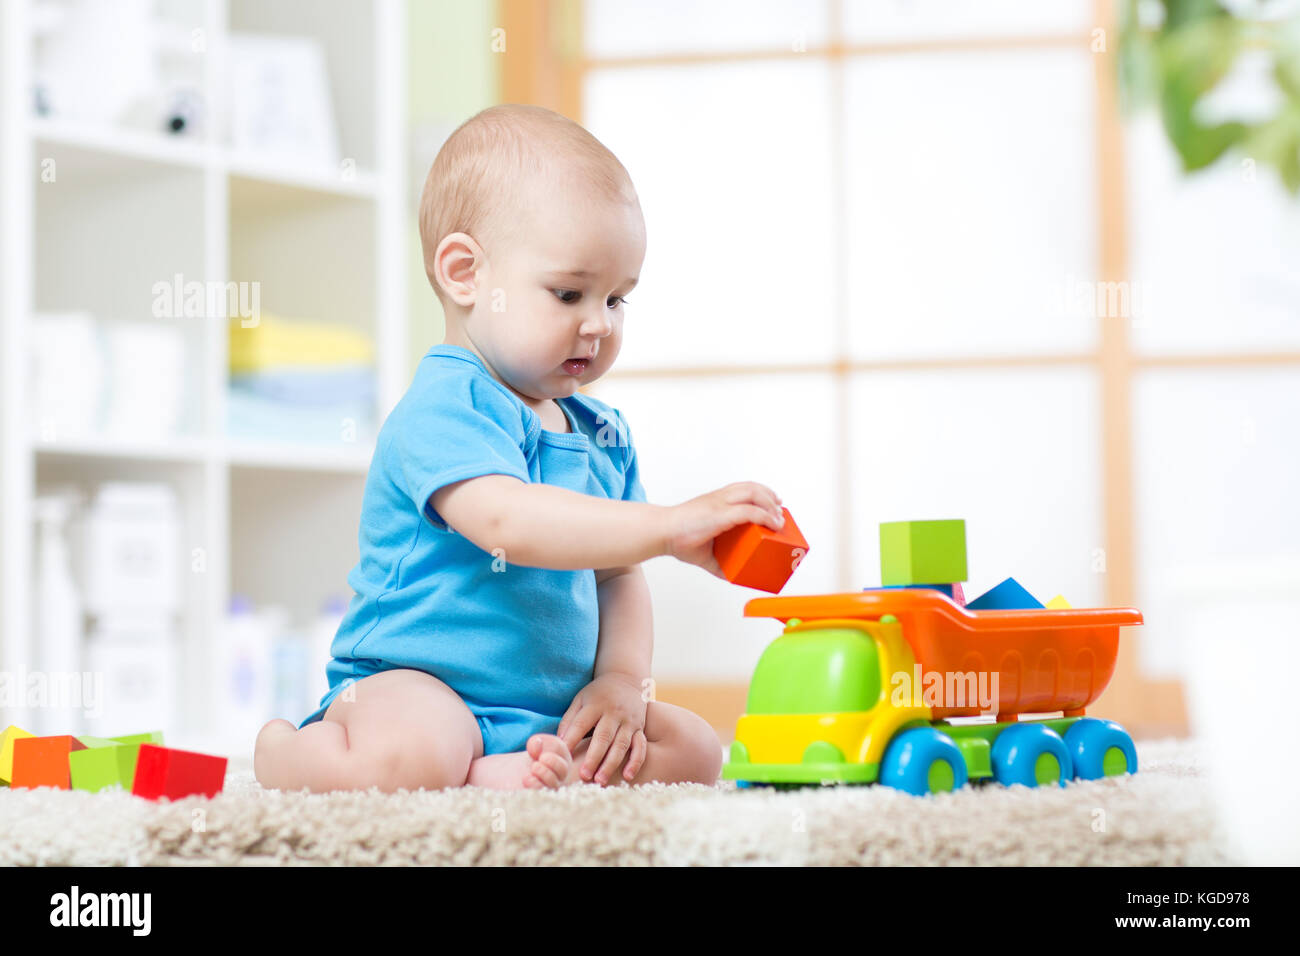 Baby toddler boy playing with toy car Stock Photo